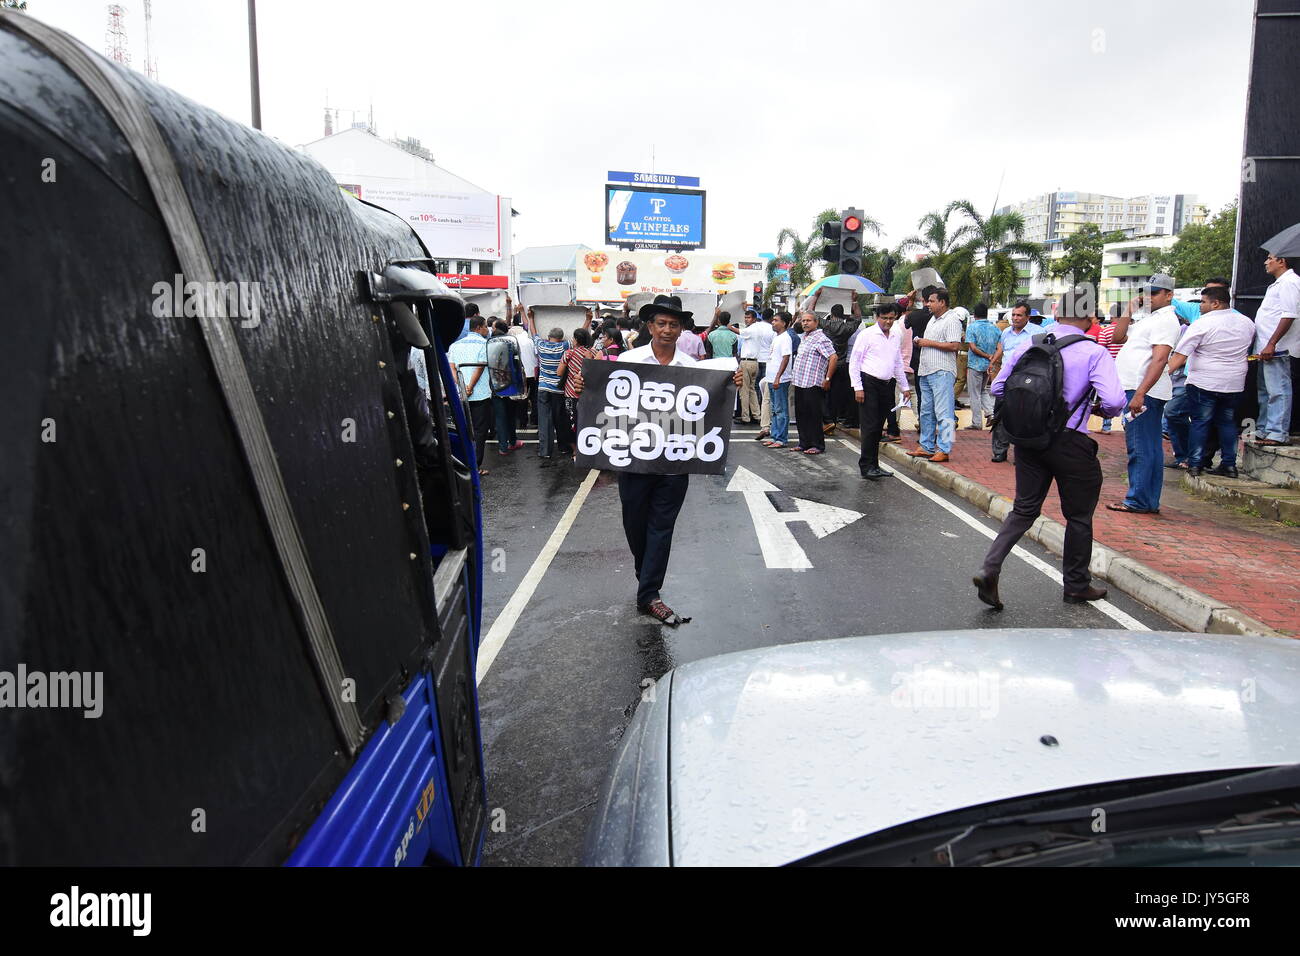 Opposition activists loyal to former president Mahinda Rajapakse protest against government plans to involve foreign companies to manage loss-making state enterprises in the capital Colombo on August 18, 2017. The rally was organised to coincide with the second anniversary of the government of Maithripala Sirisena. Stock Photo